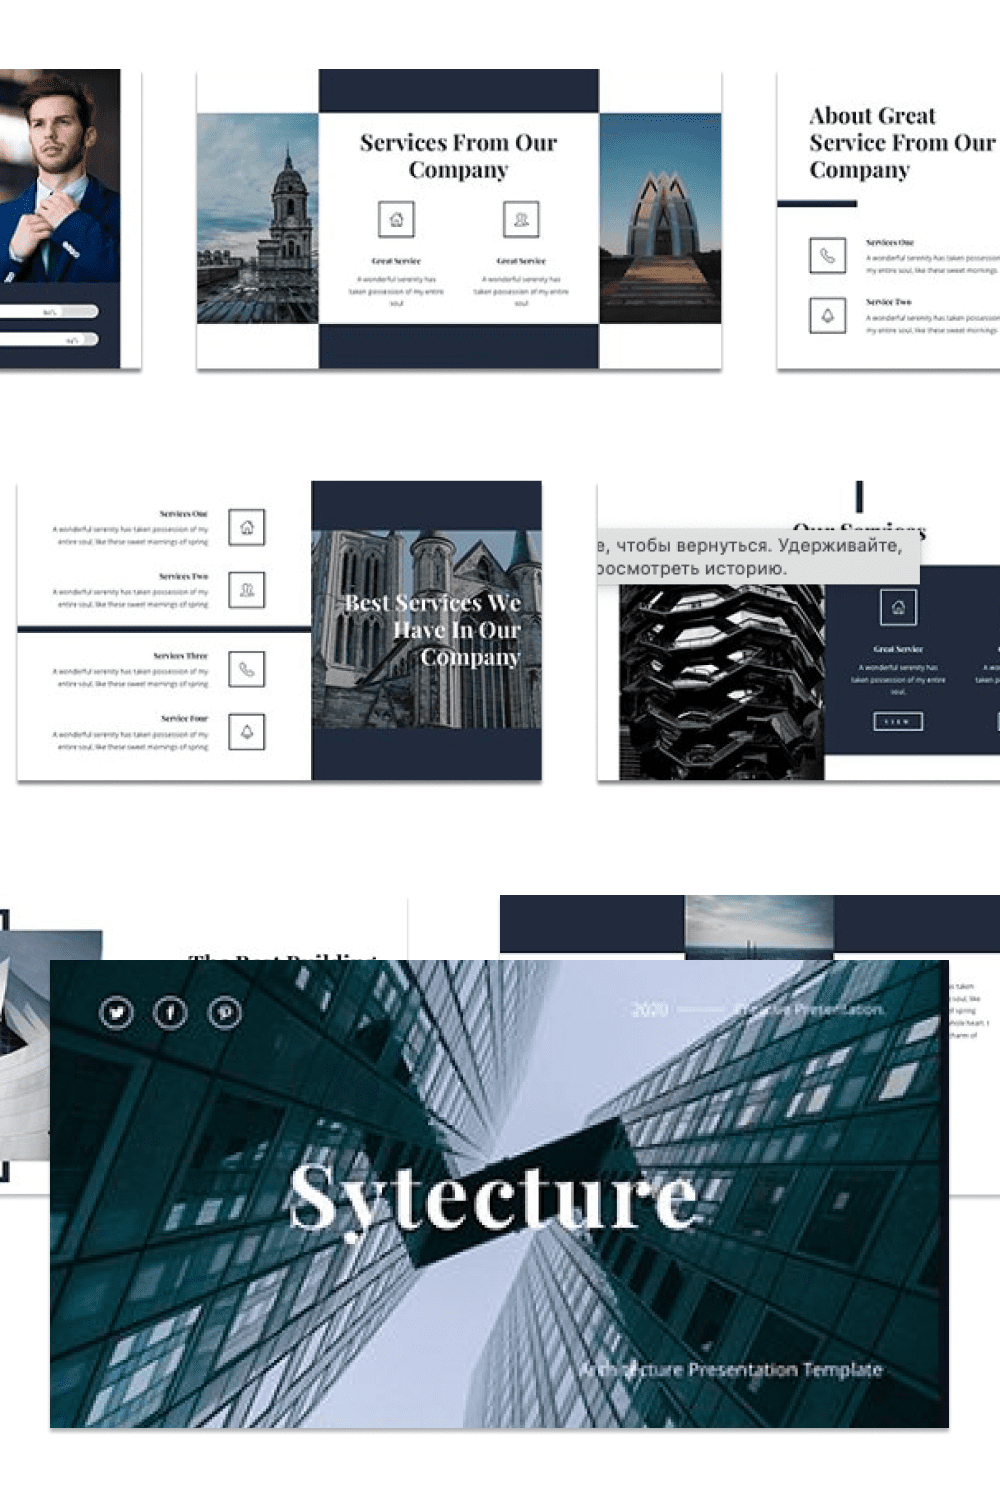 Aesthetic template in light for different purposes.